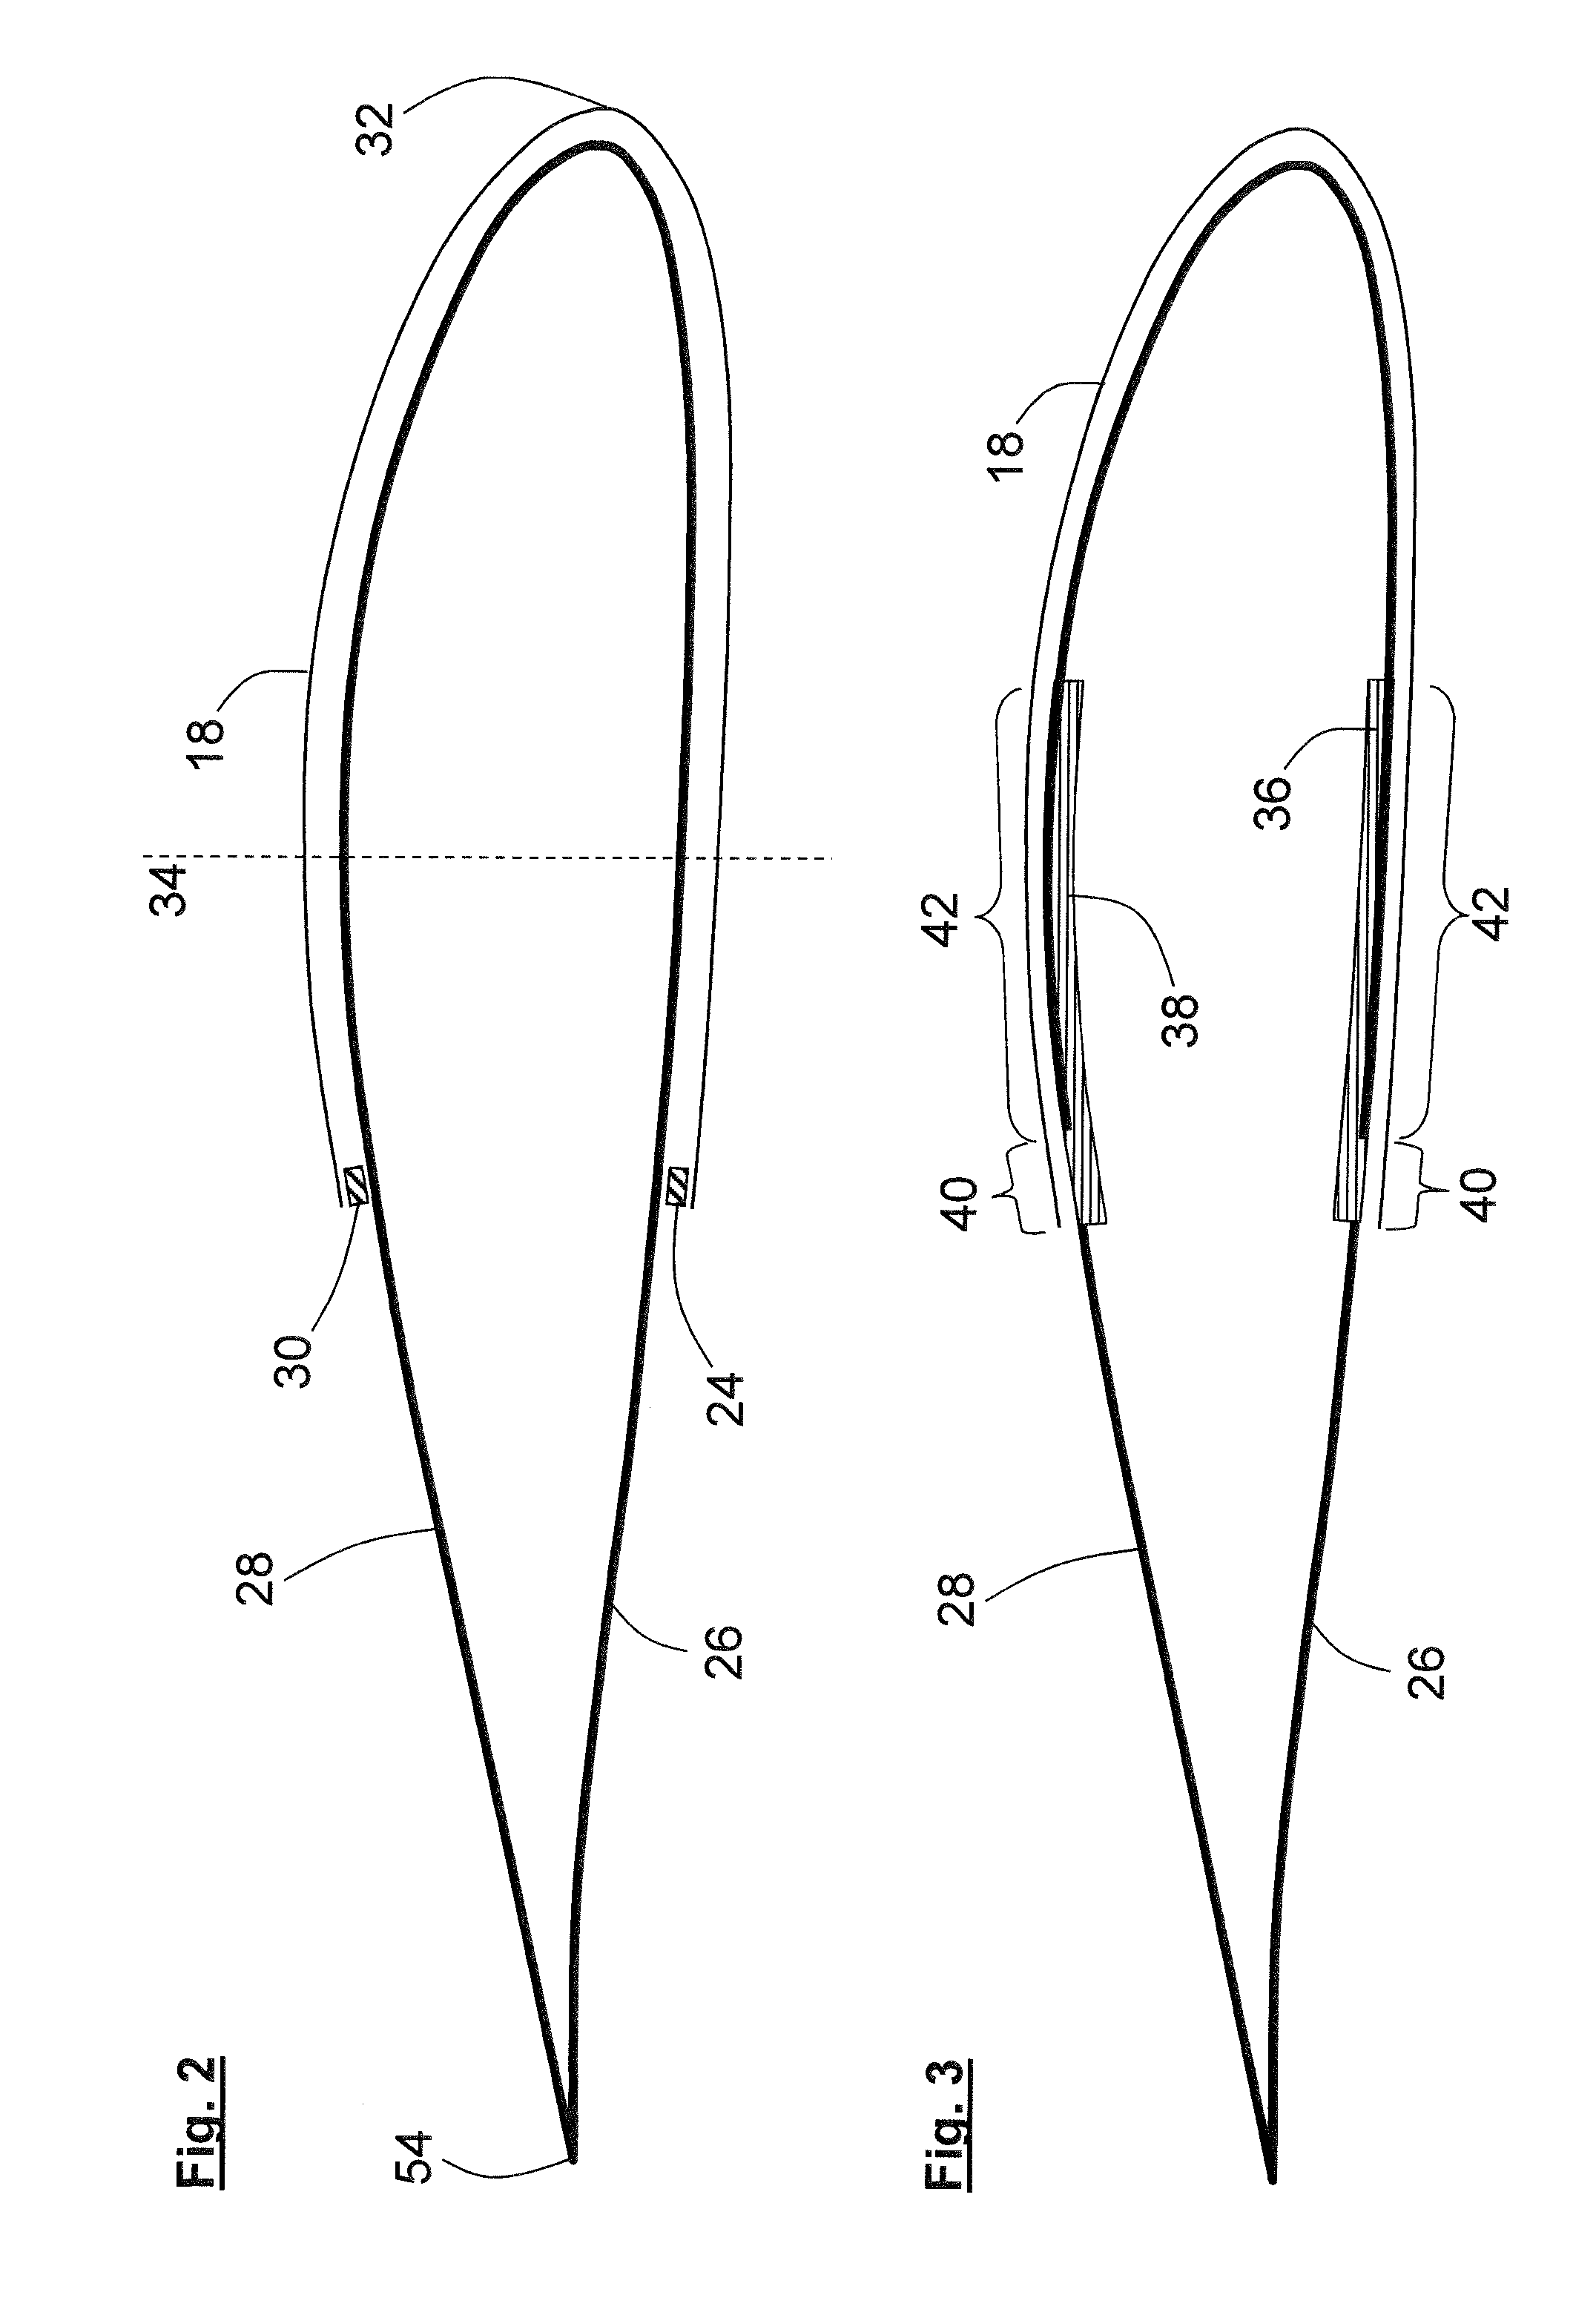 Wind turbine rotor blade having an electrical heating device and a plurality of lightning conductors